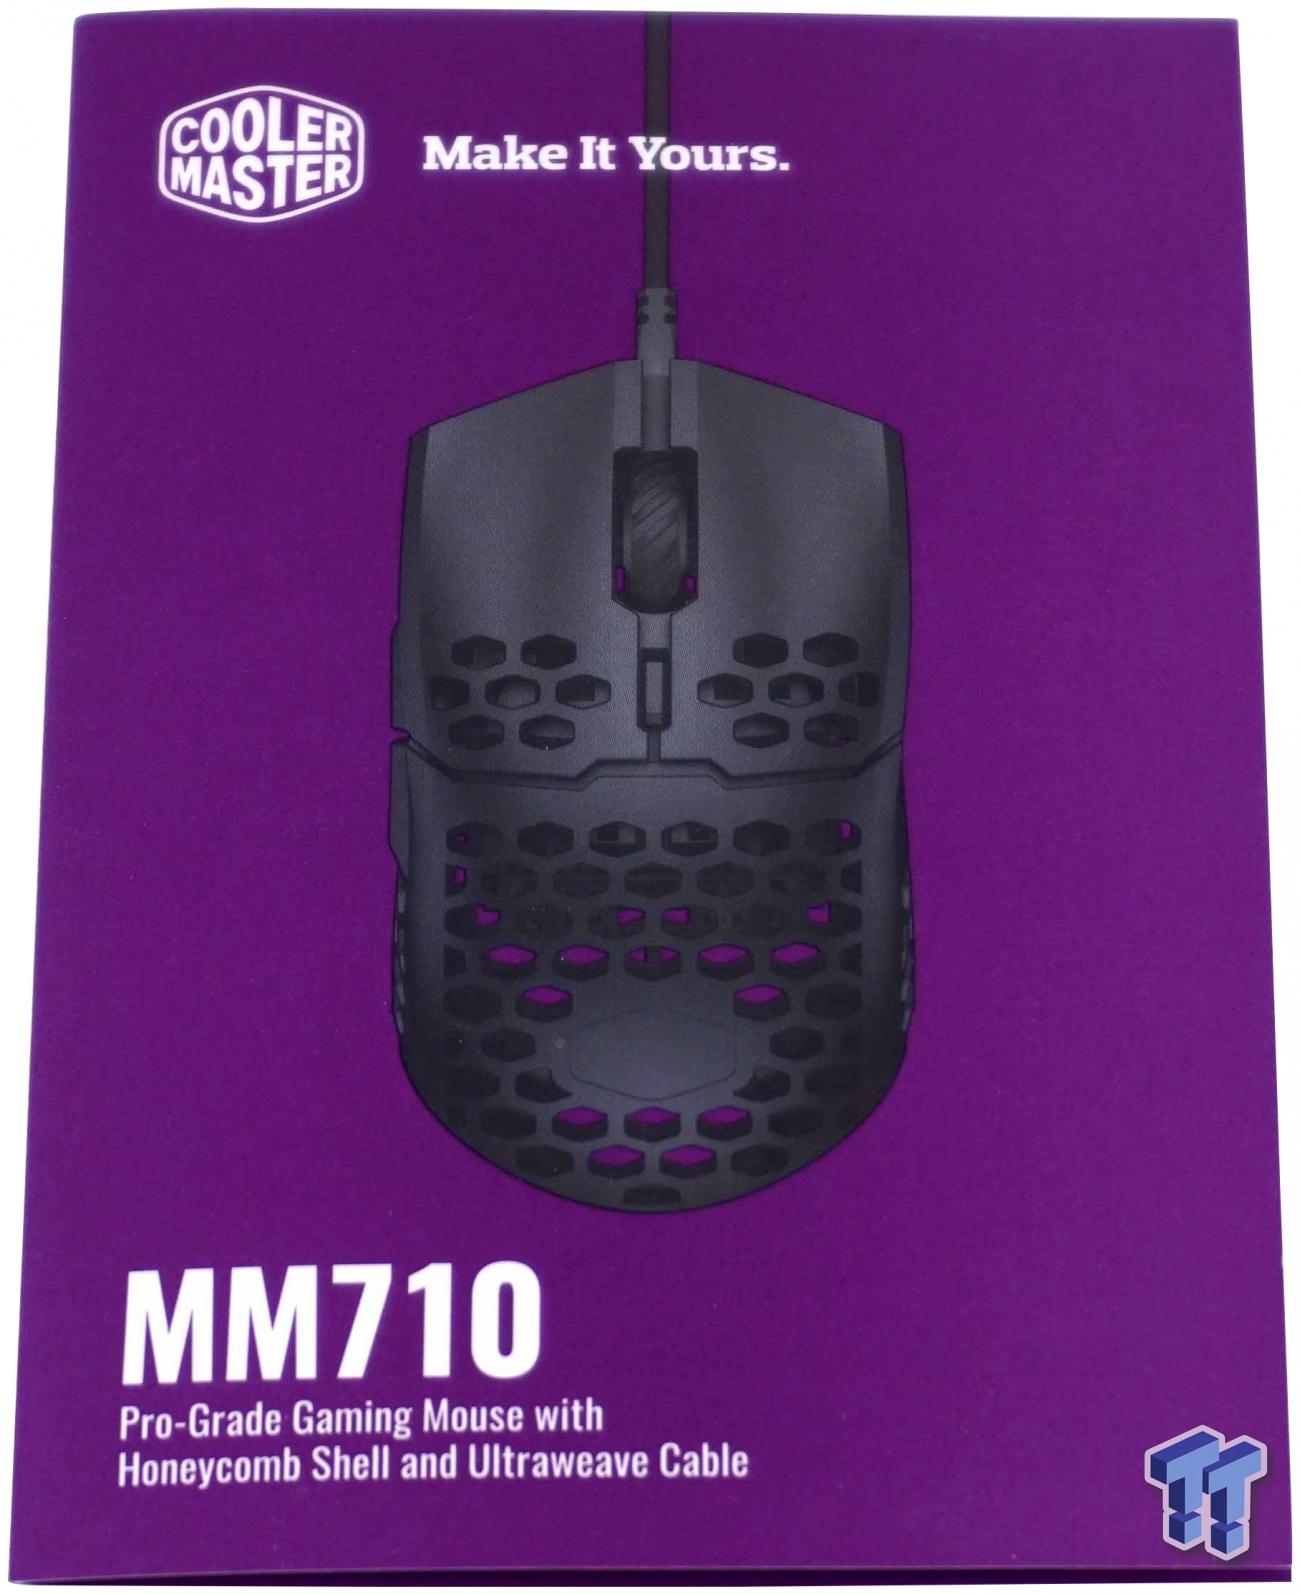 Cooler Master MasterMouse MM710 Gaming Mouse Review | TweakTown